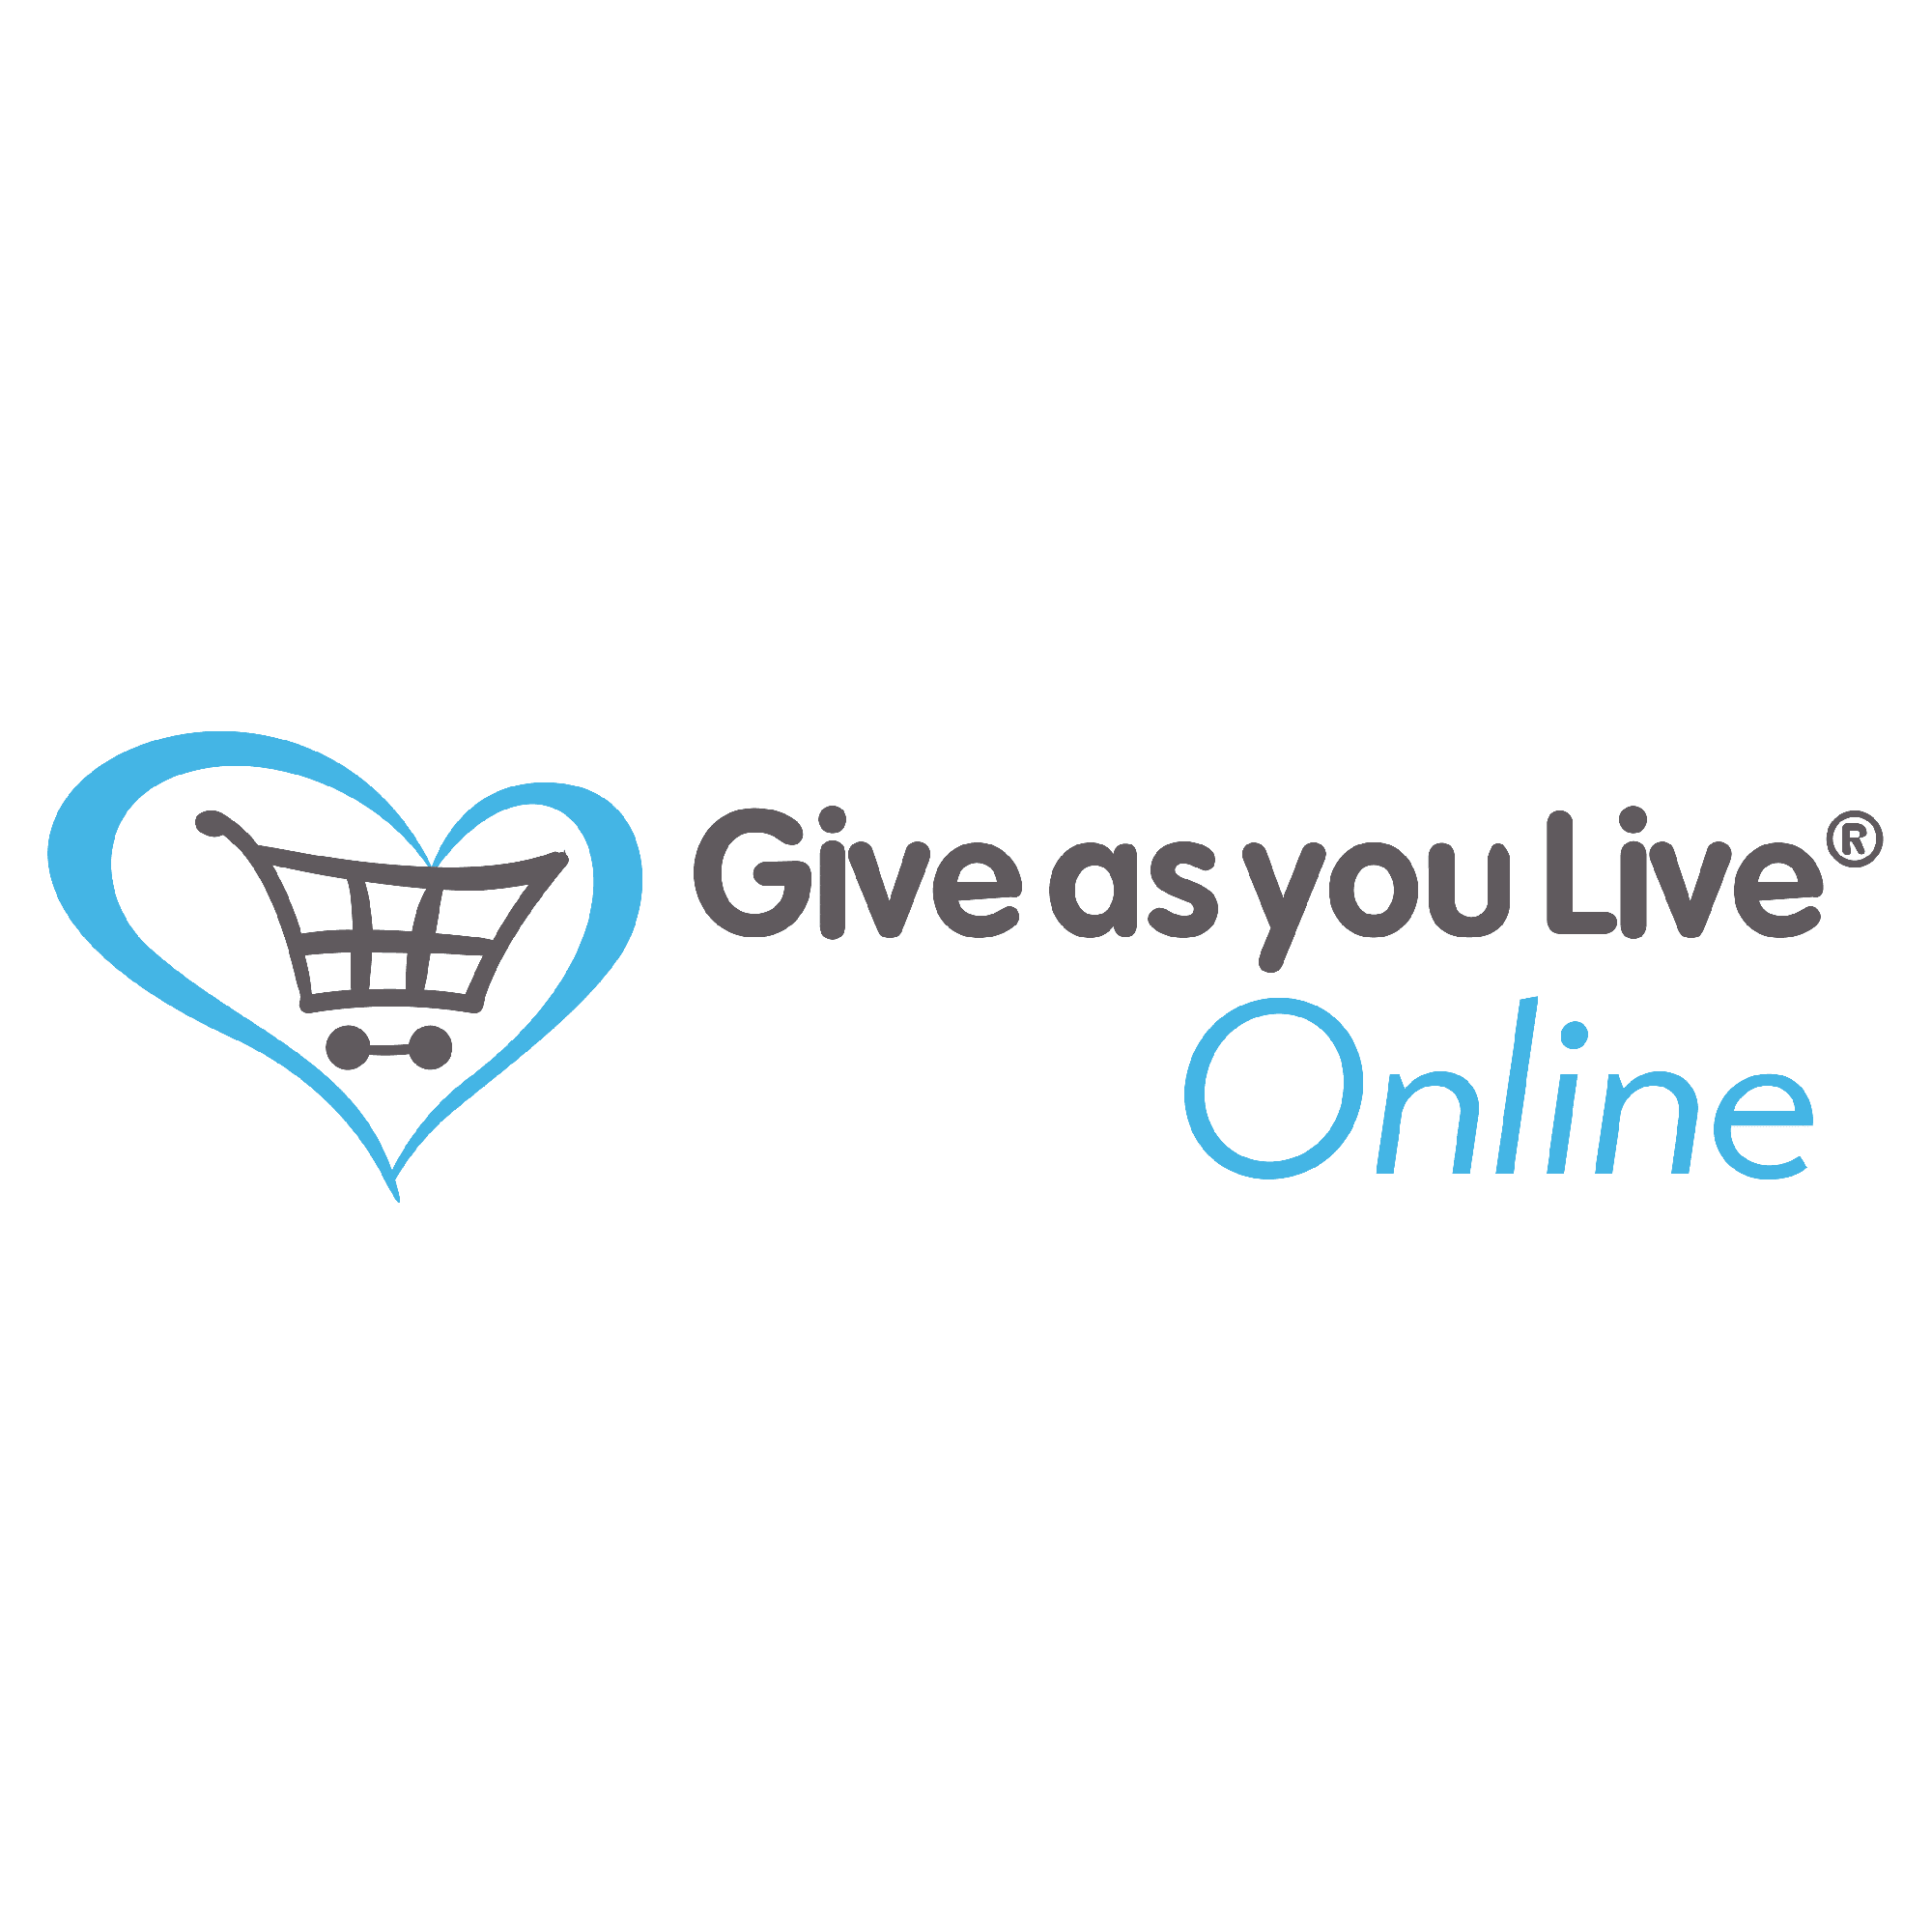 Donate to Charity while shopping, paying cost of living expenses, buying gifts, insurance and more